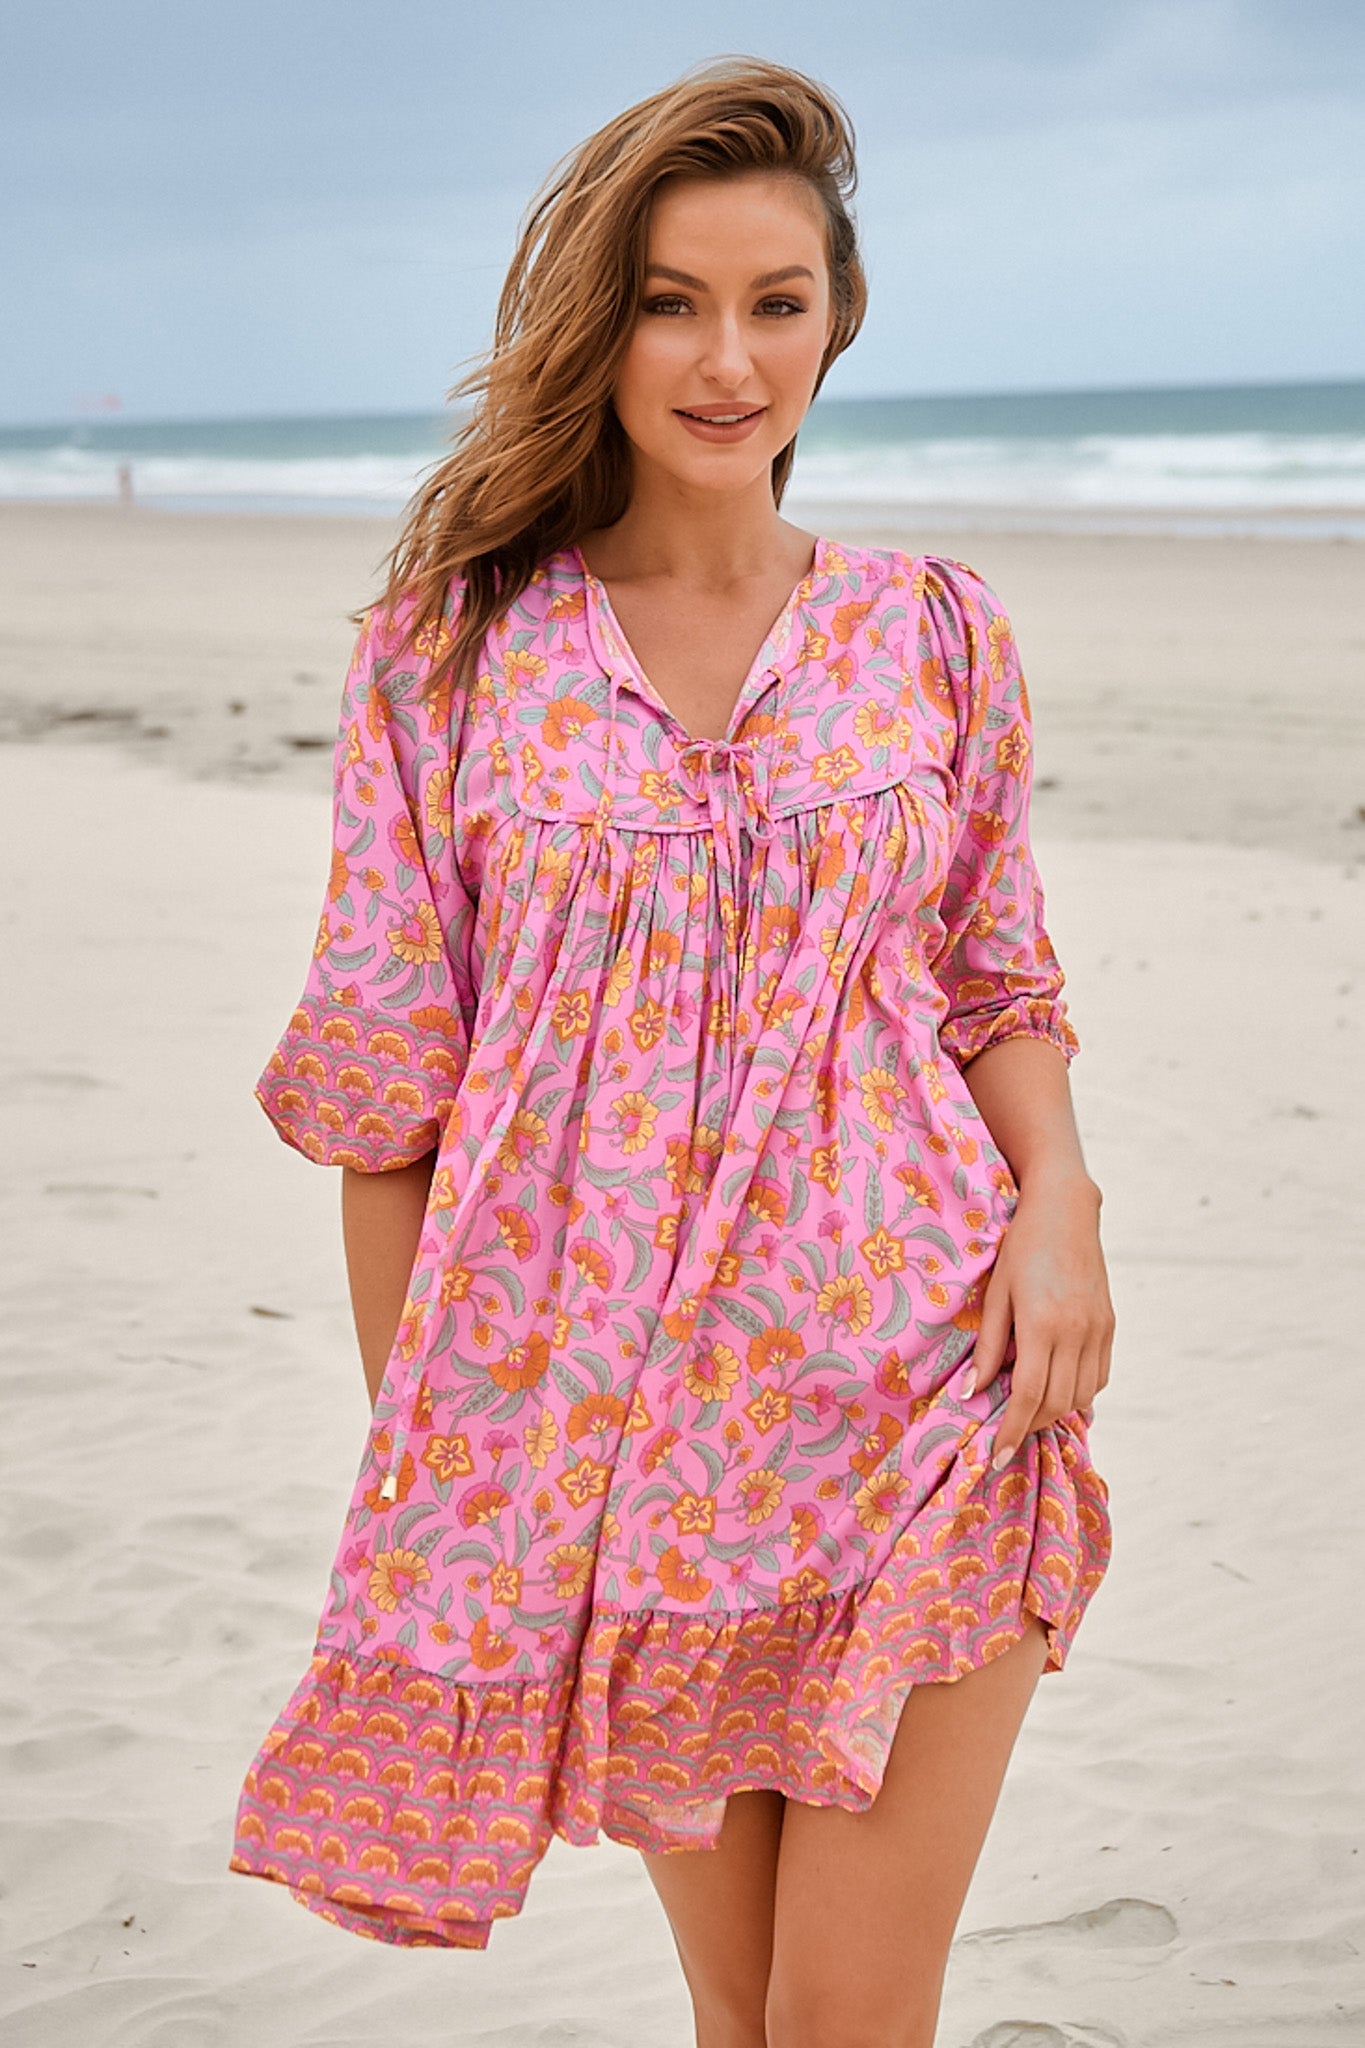 JAASE - French Mini Dress: Yoke Neckline Dress with Matching Belt in Rosewater Print